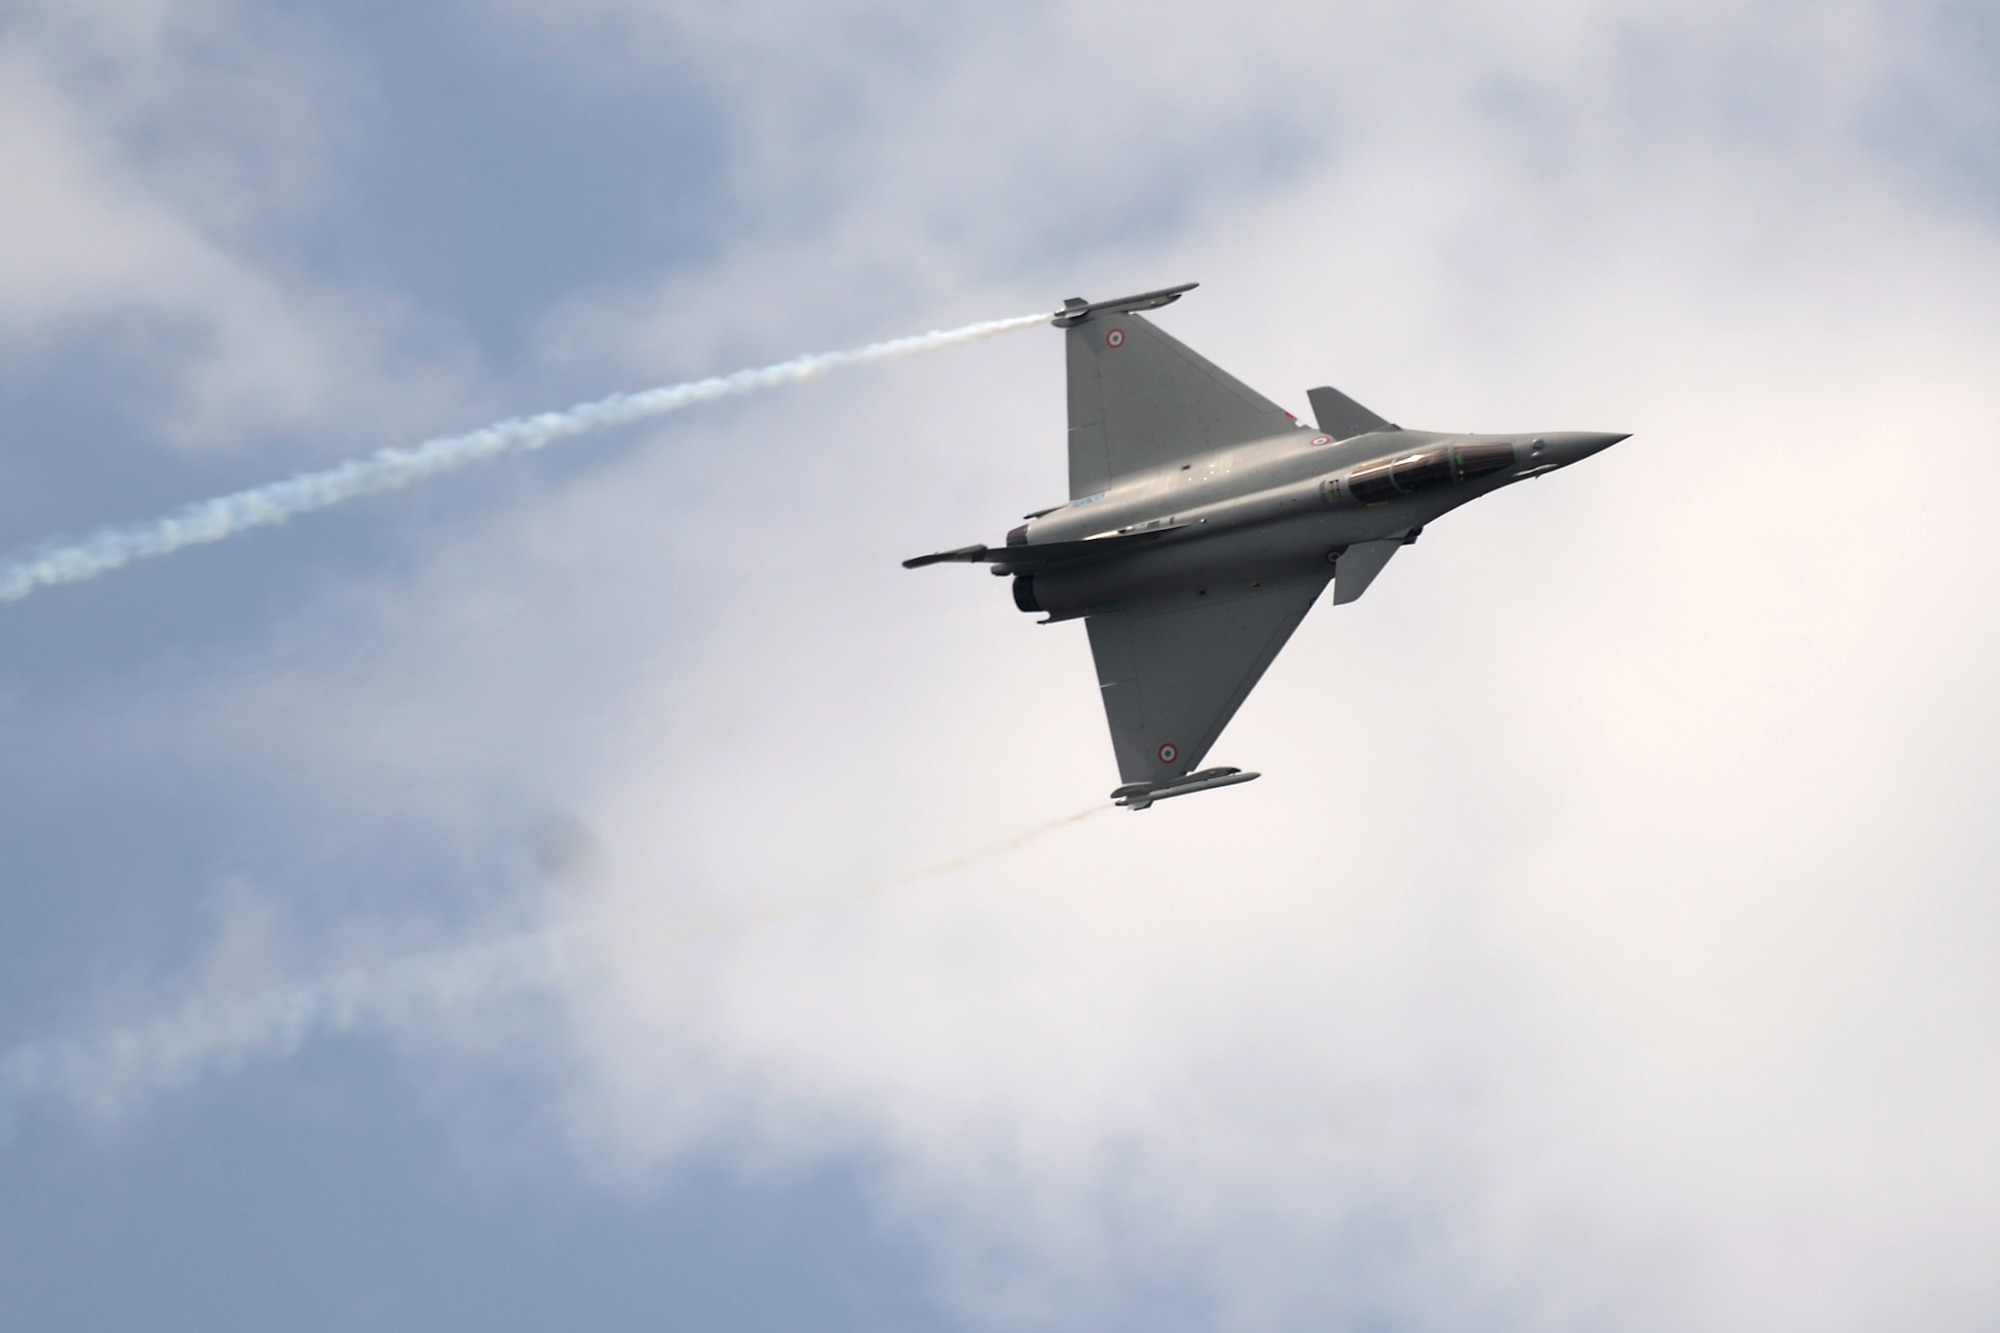 RAF FAIRFORD, United Kingdom - A RAF Eurofighter Typhoon performs during the Royal International Air Tattoo here July 8. More than 130,000 people attended the tattoo. (U.S. Air Force photo by Master Sgt. John Barton)